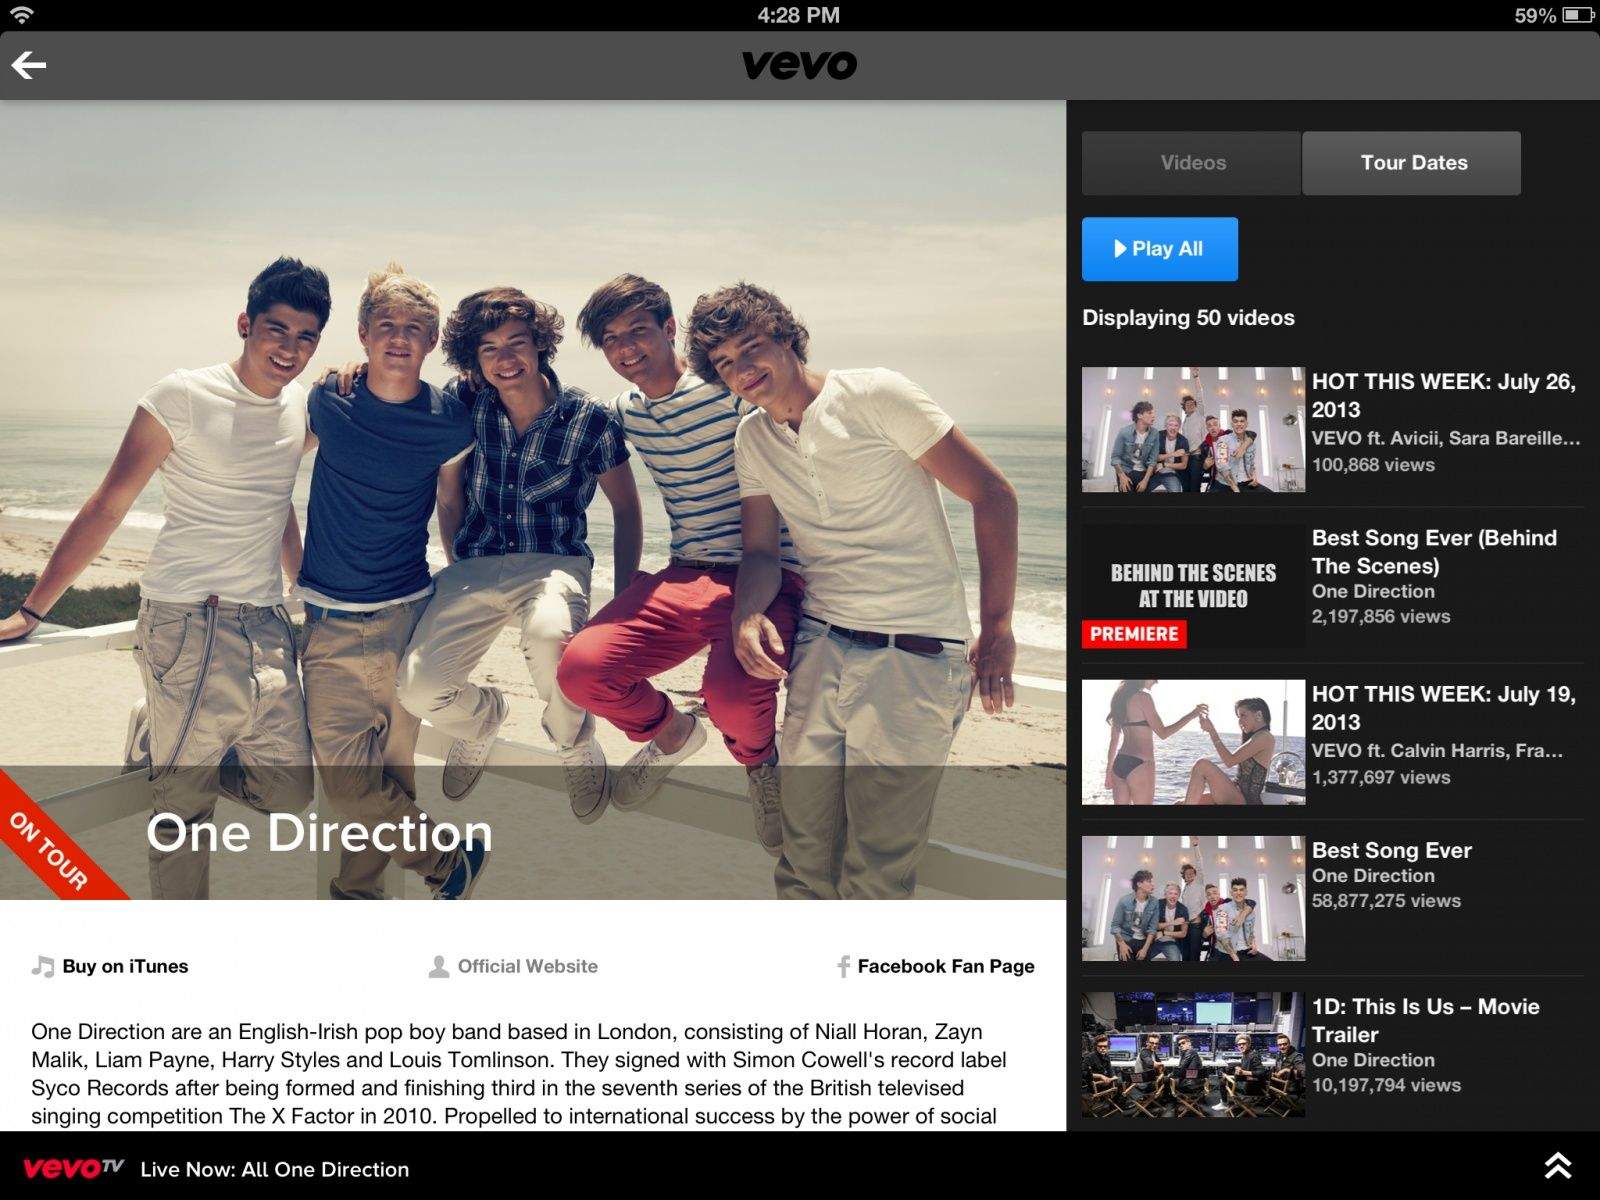 Ready to get your One Direction fix on the Apple TV?